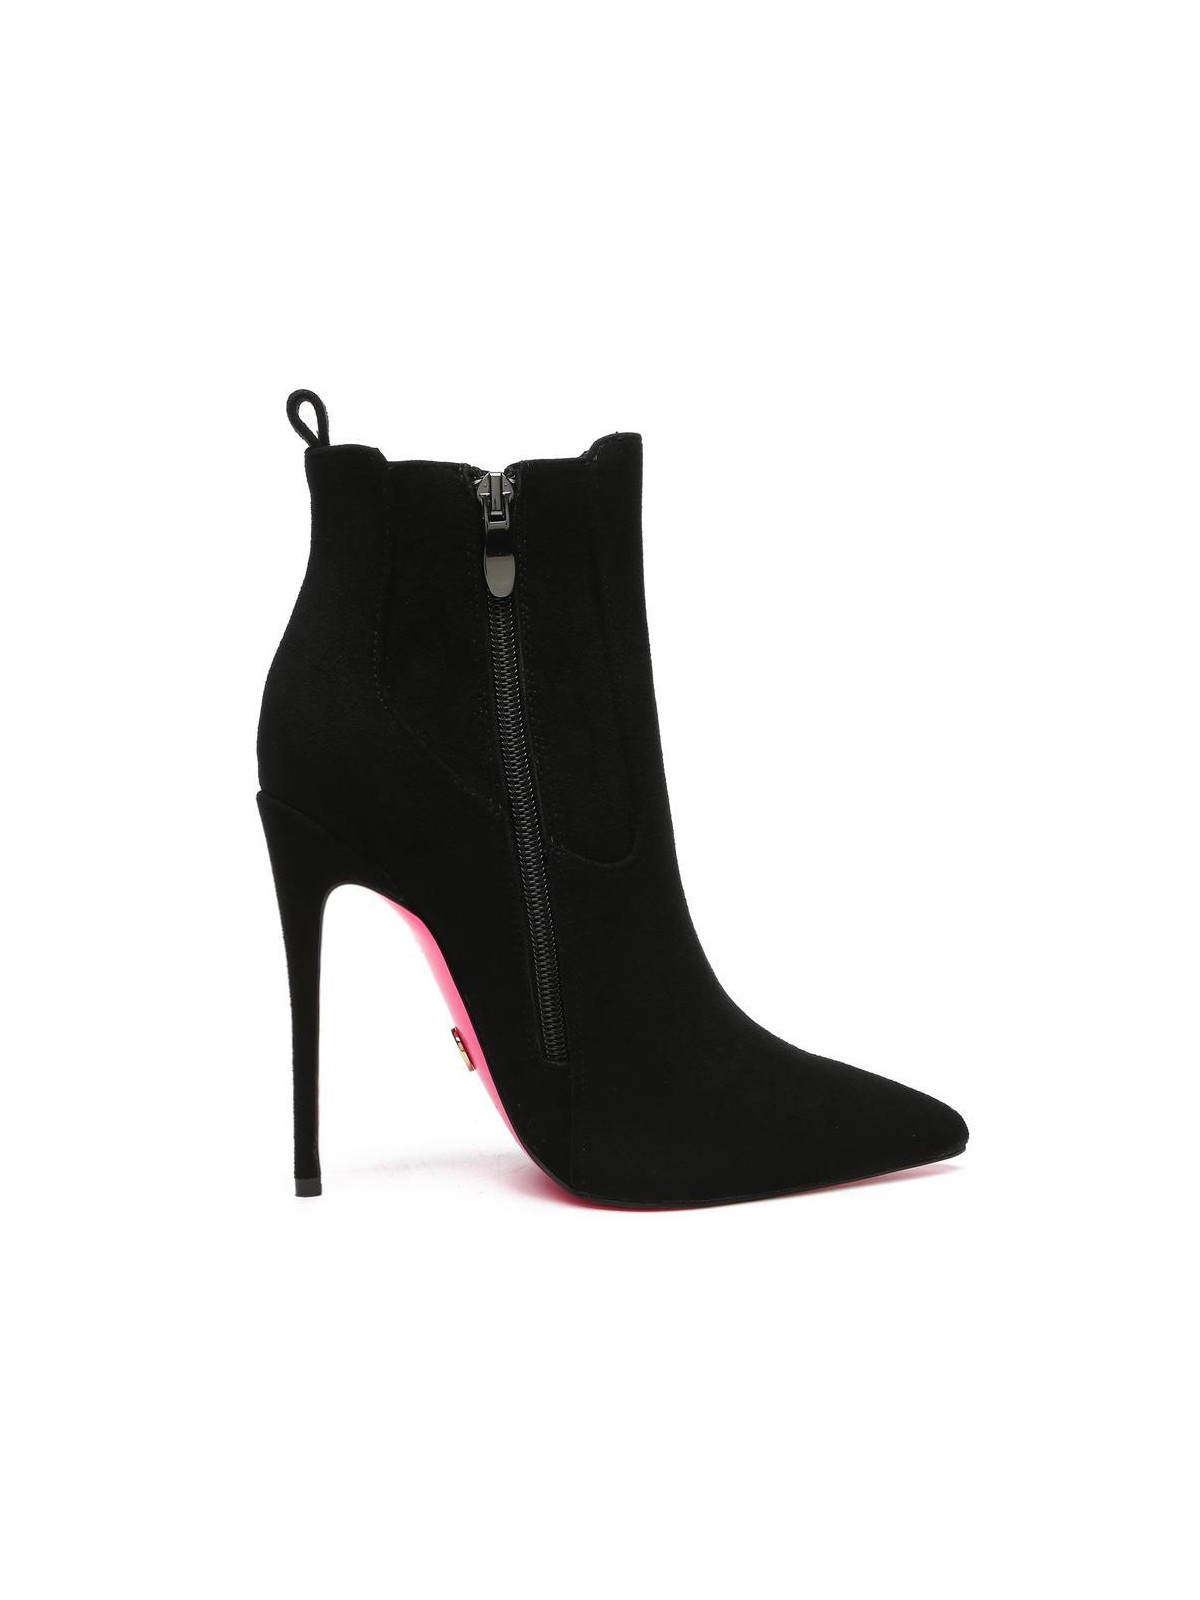 Black SMILE zipper Giaro 16cm high heeled Destroyer ankle boots